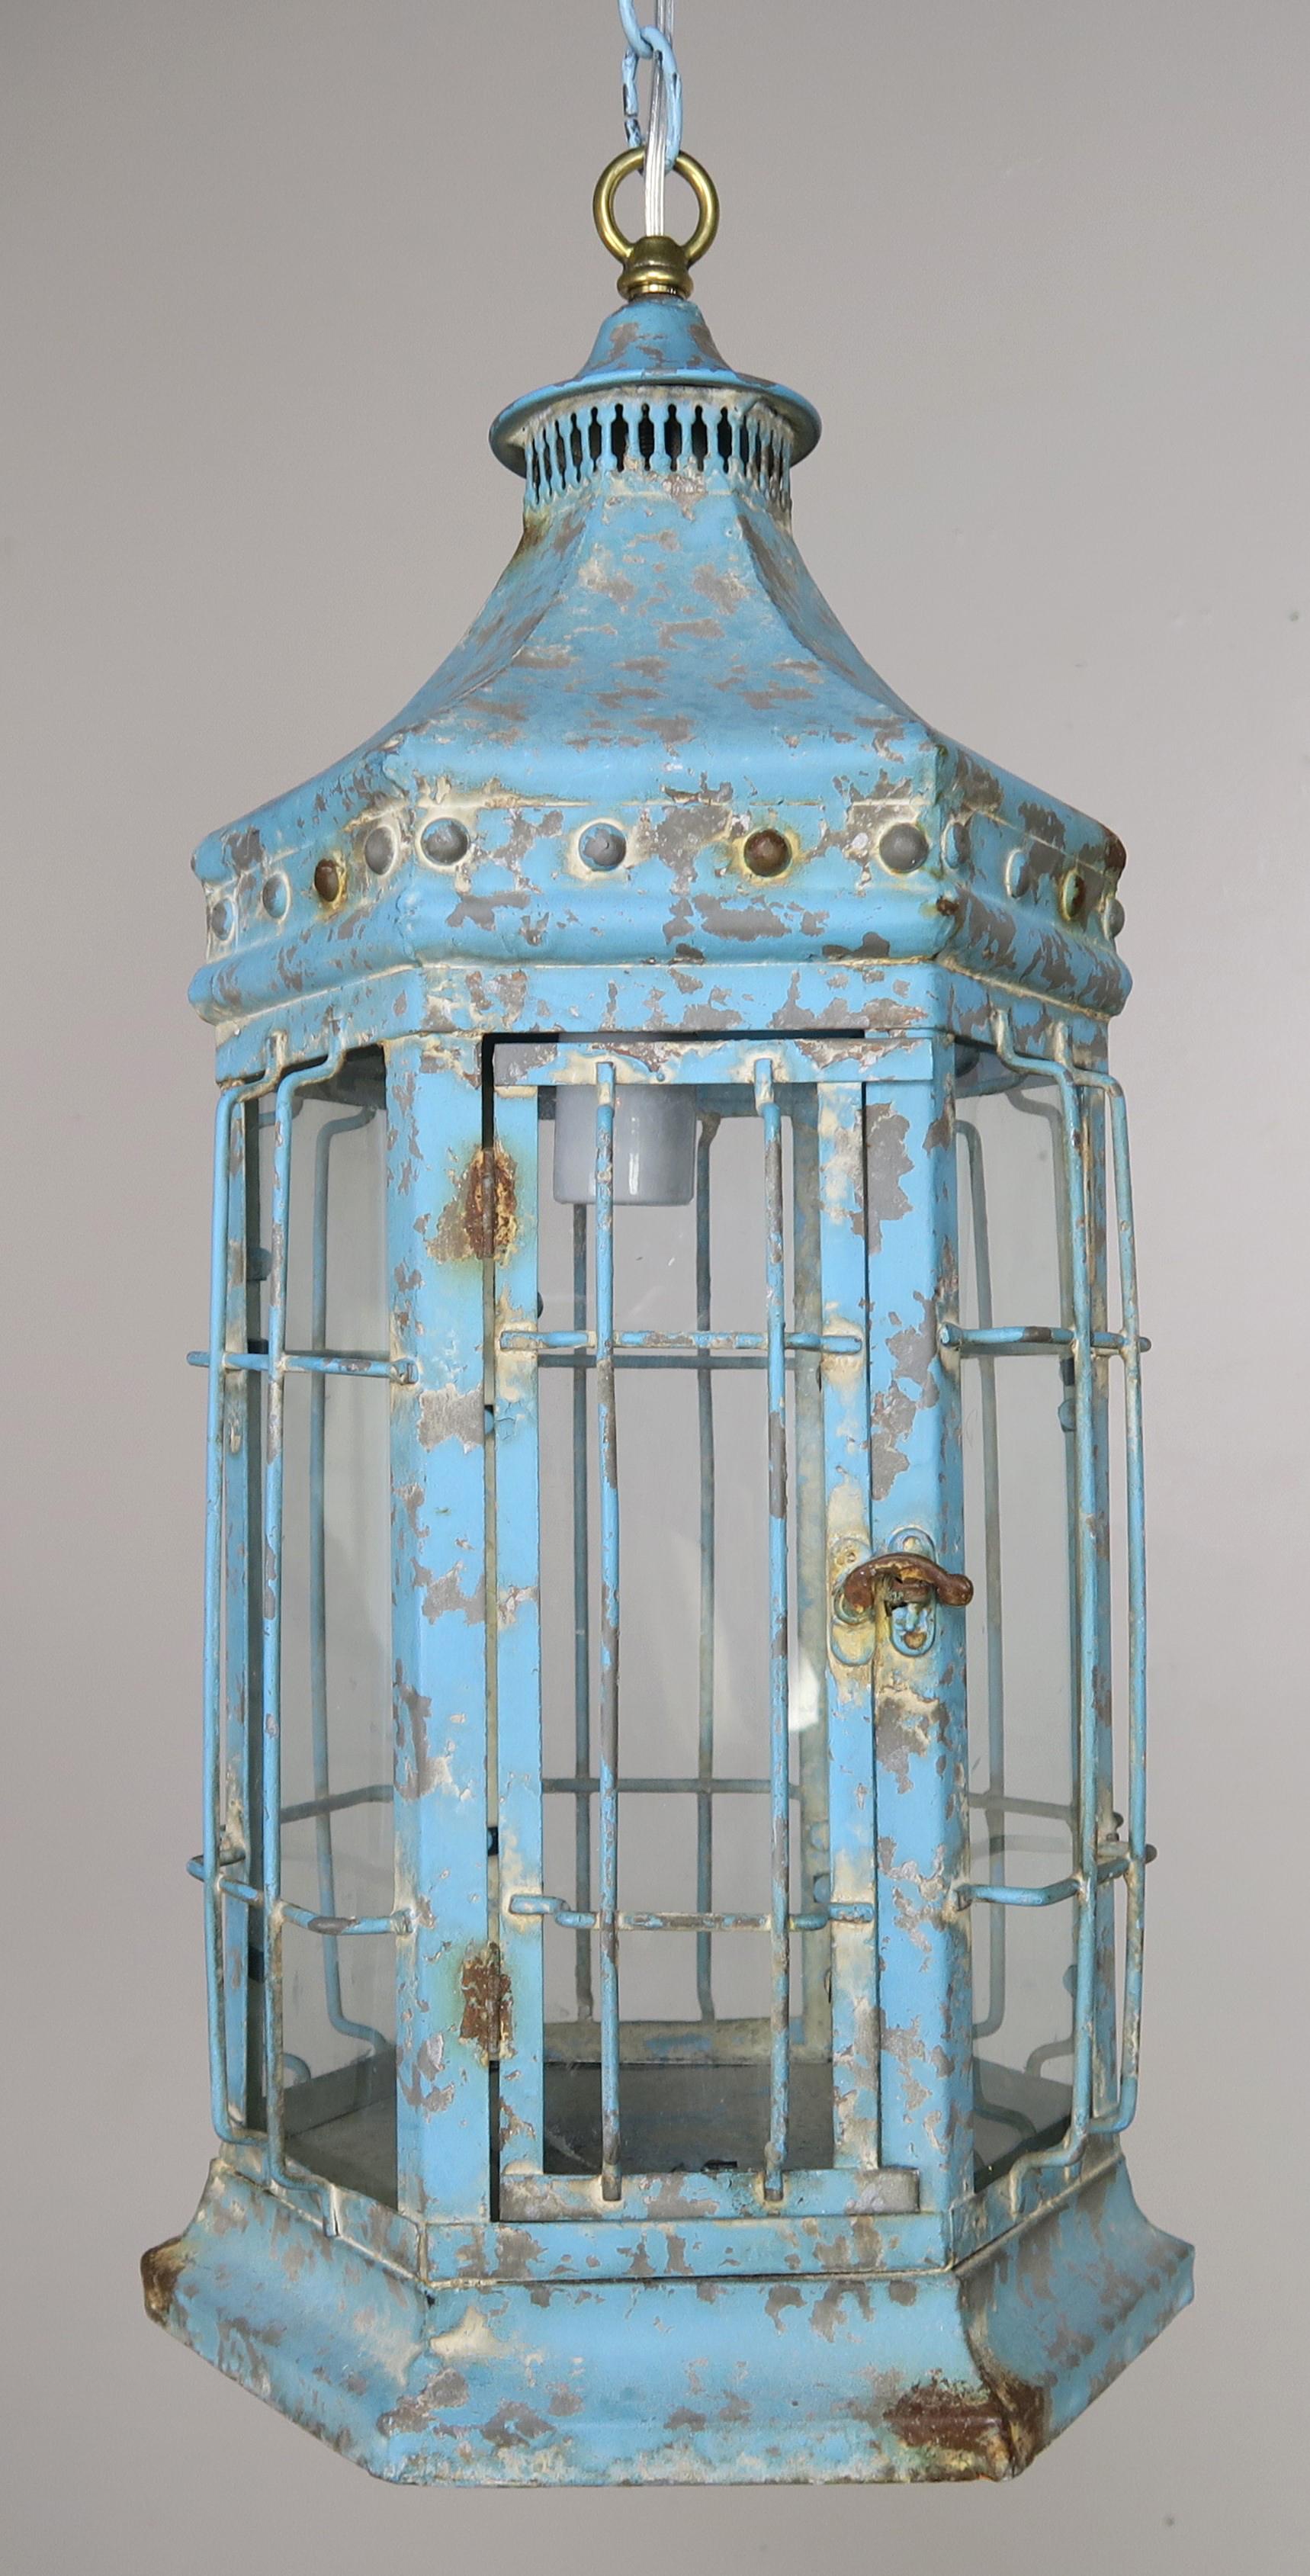 Chinoiserie style blue painted pagoda shaped lantern. This fixture still has its original antique glass. The lantern has been wired (it originally held a candle) and includes chain and canopy.